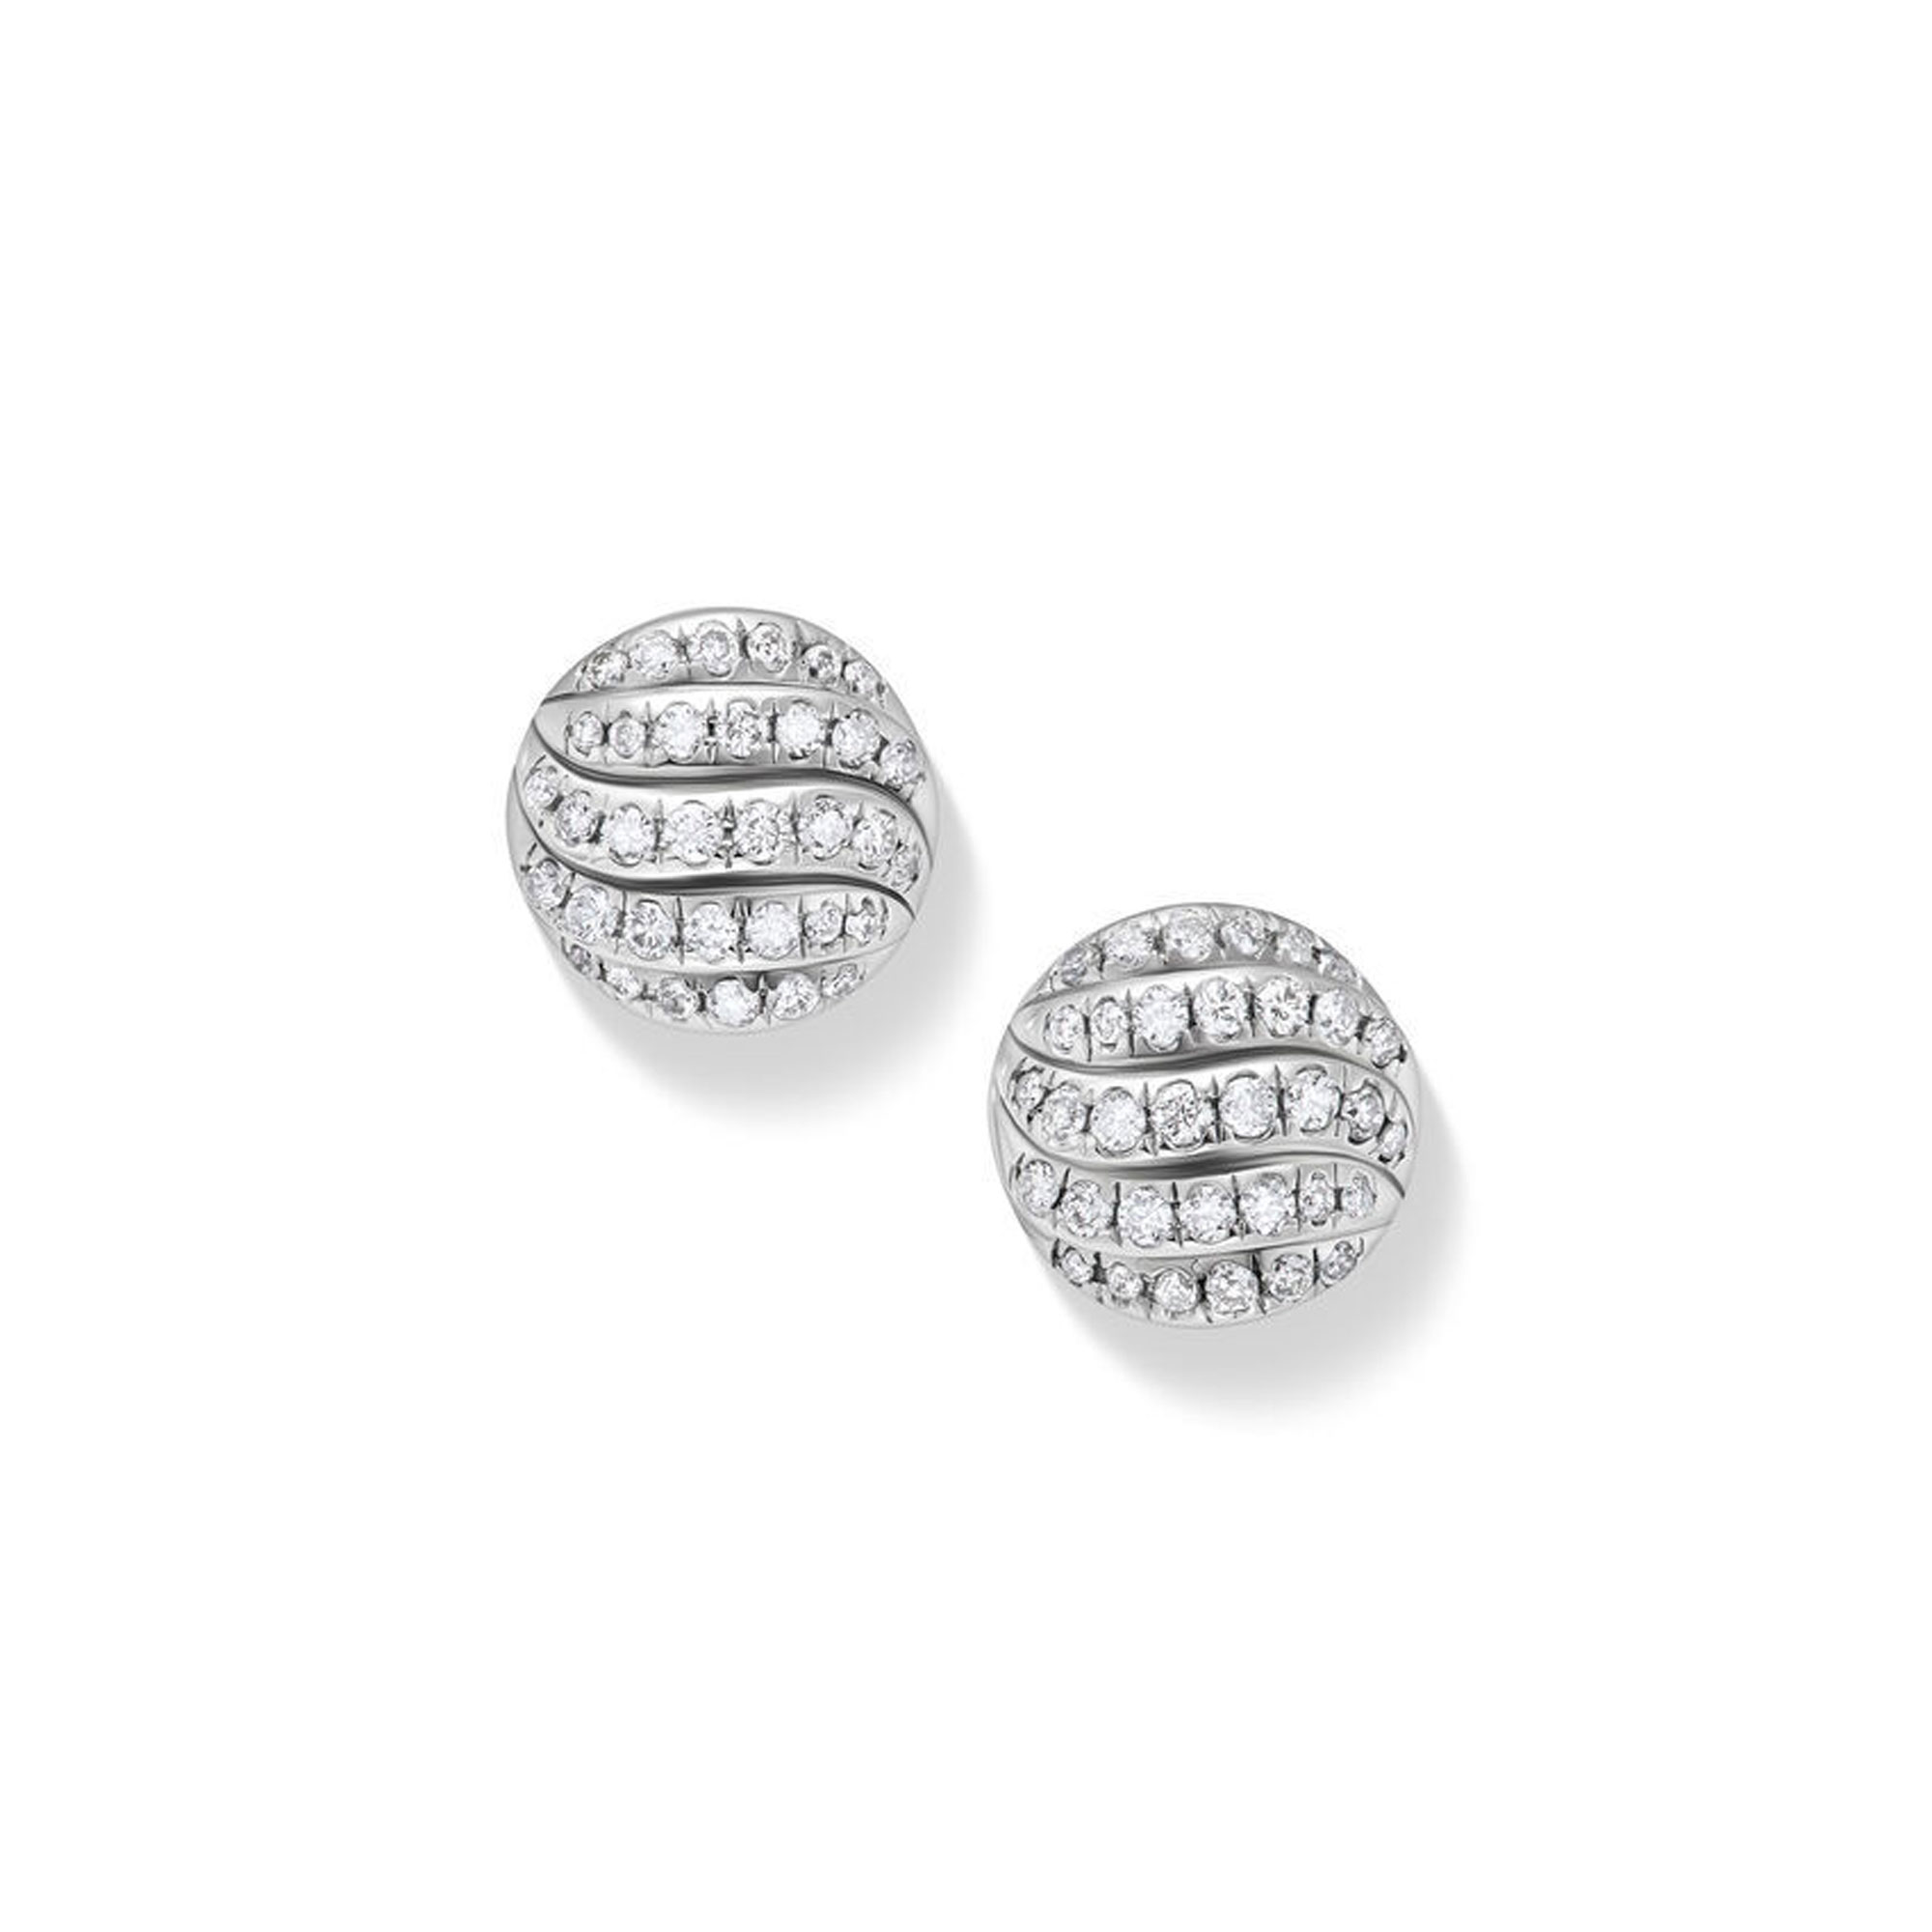 David Yurman Sculpted Cable Stud Earrings in Sterling Silver with Diamonds